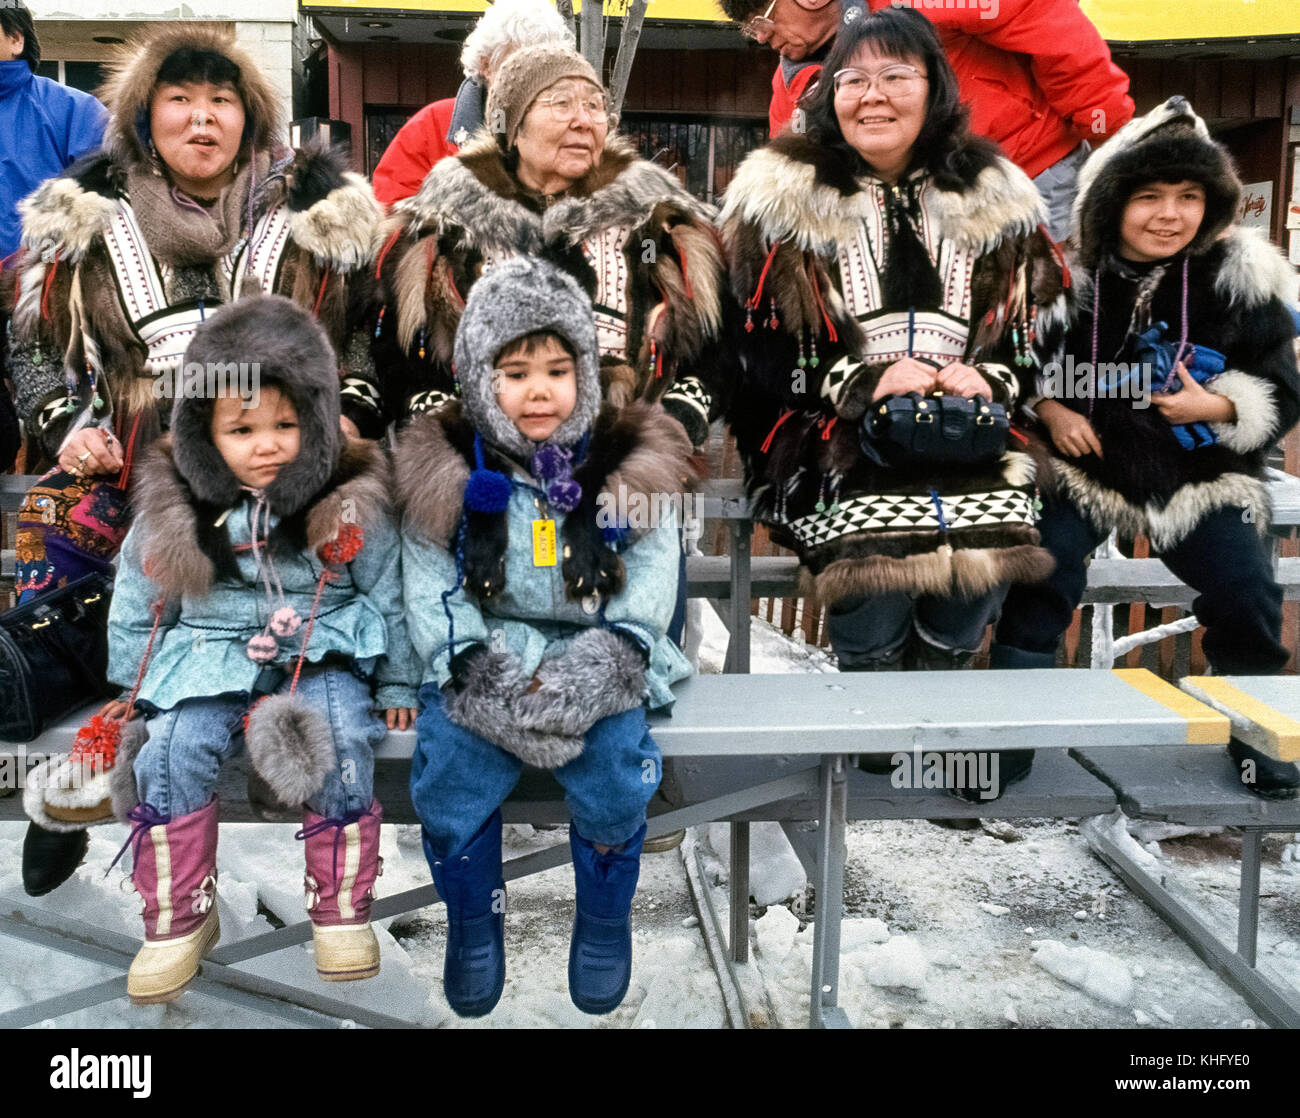 A native Alaskan grandmother shares spectator seats with her daughters and their children in their fur-decorated parkas to watch the World Championship Sled Dog Races in Anchorage that take place during the Anchorage Fur Rendezvous, the oldest and largest winter festival in Alaska, USA. Dog teams and their mushers compete over three days to determine the winner with the fastest elapsed time. The event began in 1946 and is considered the grandfather of all Alaska races. Stock Photo